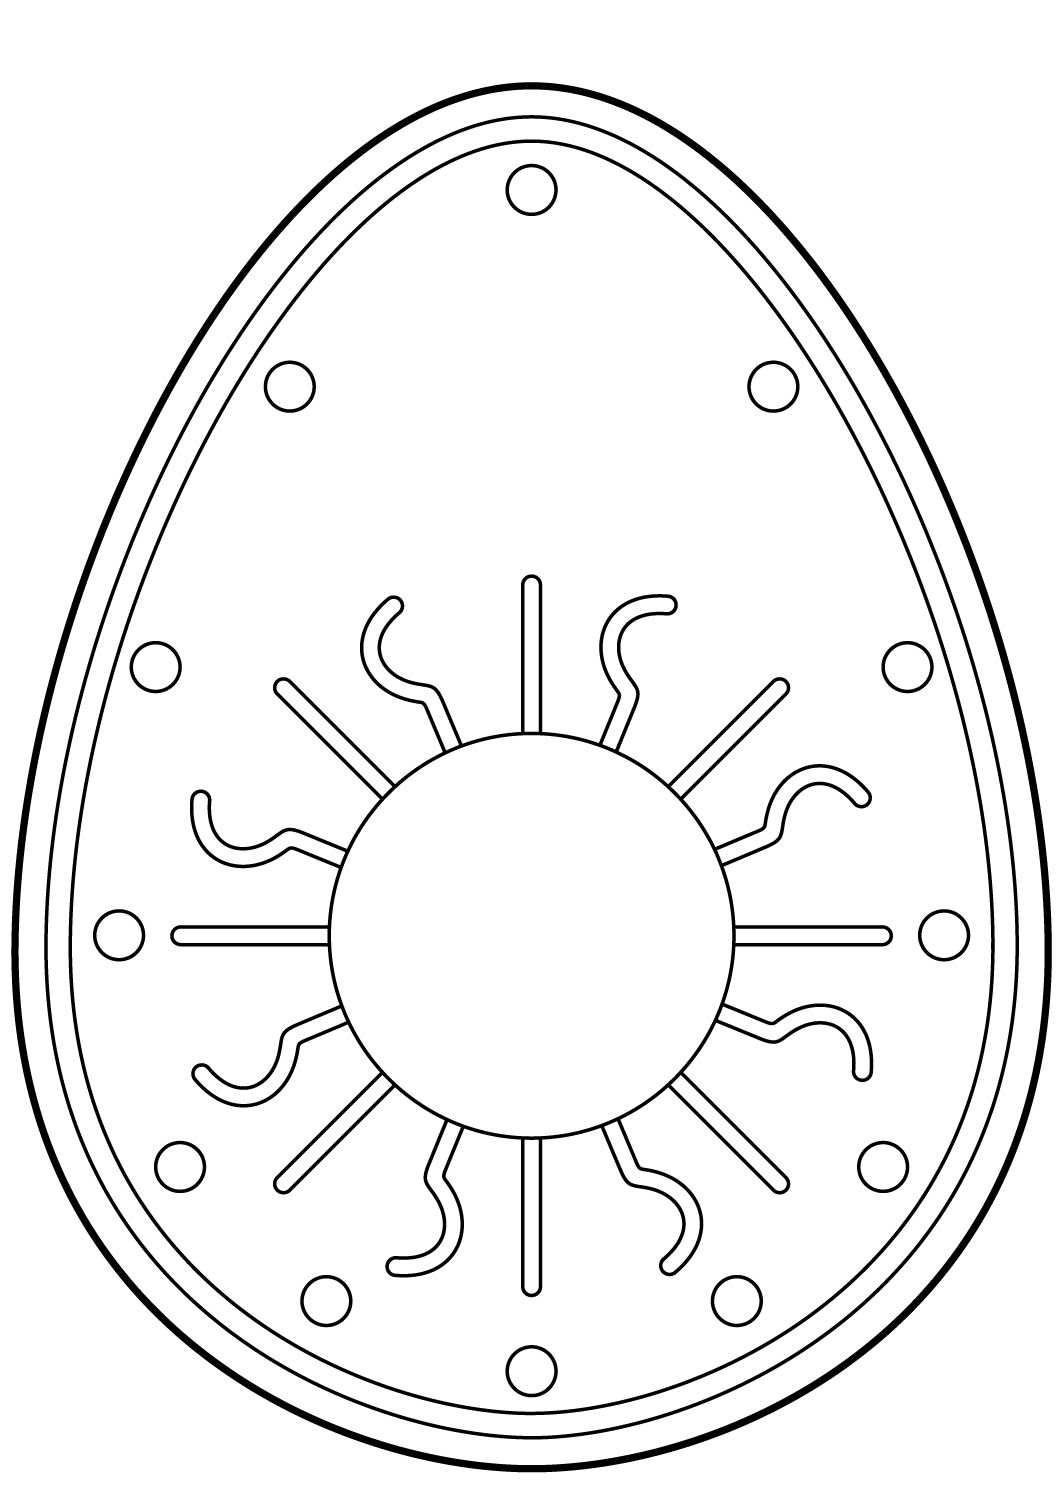 Easter Egg With Decorative Sun